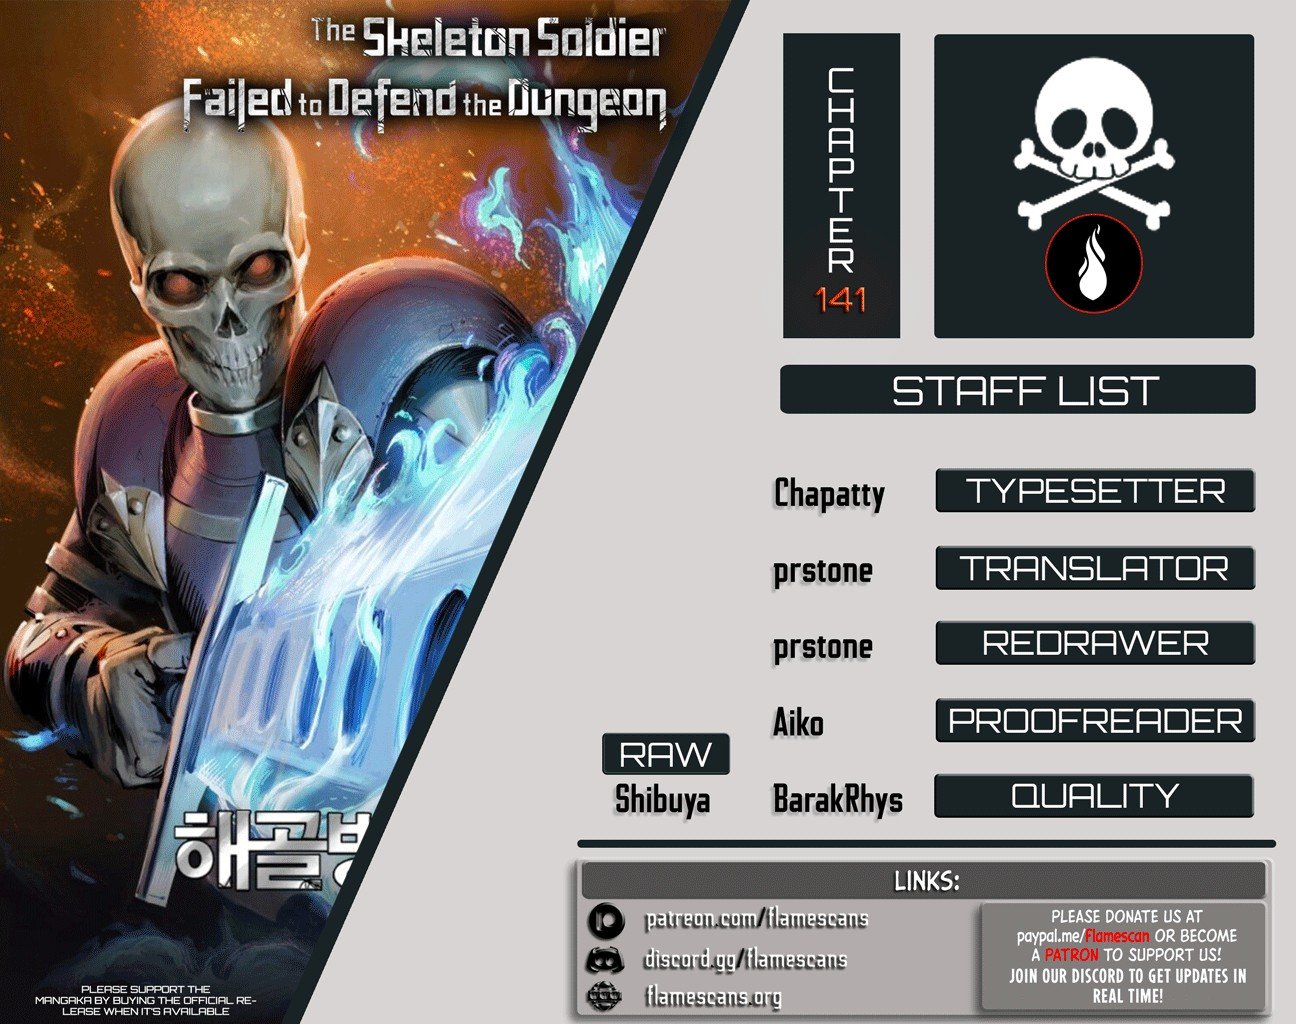 skeleton-soldier-couldnt-protect-the-dungeon-chap-141-0